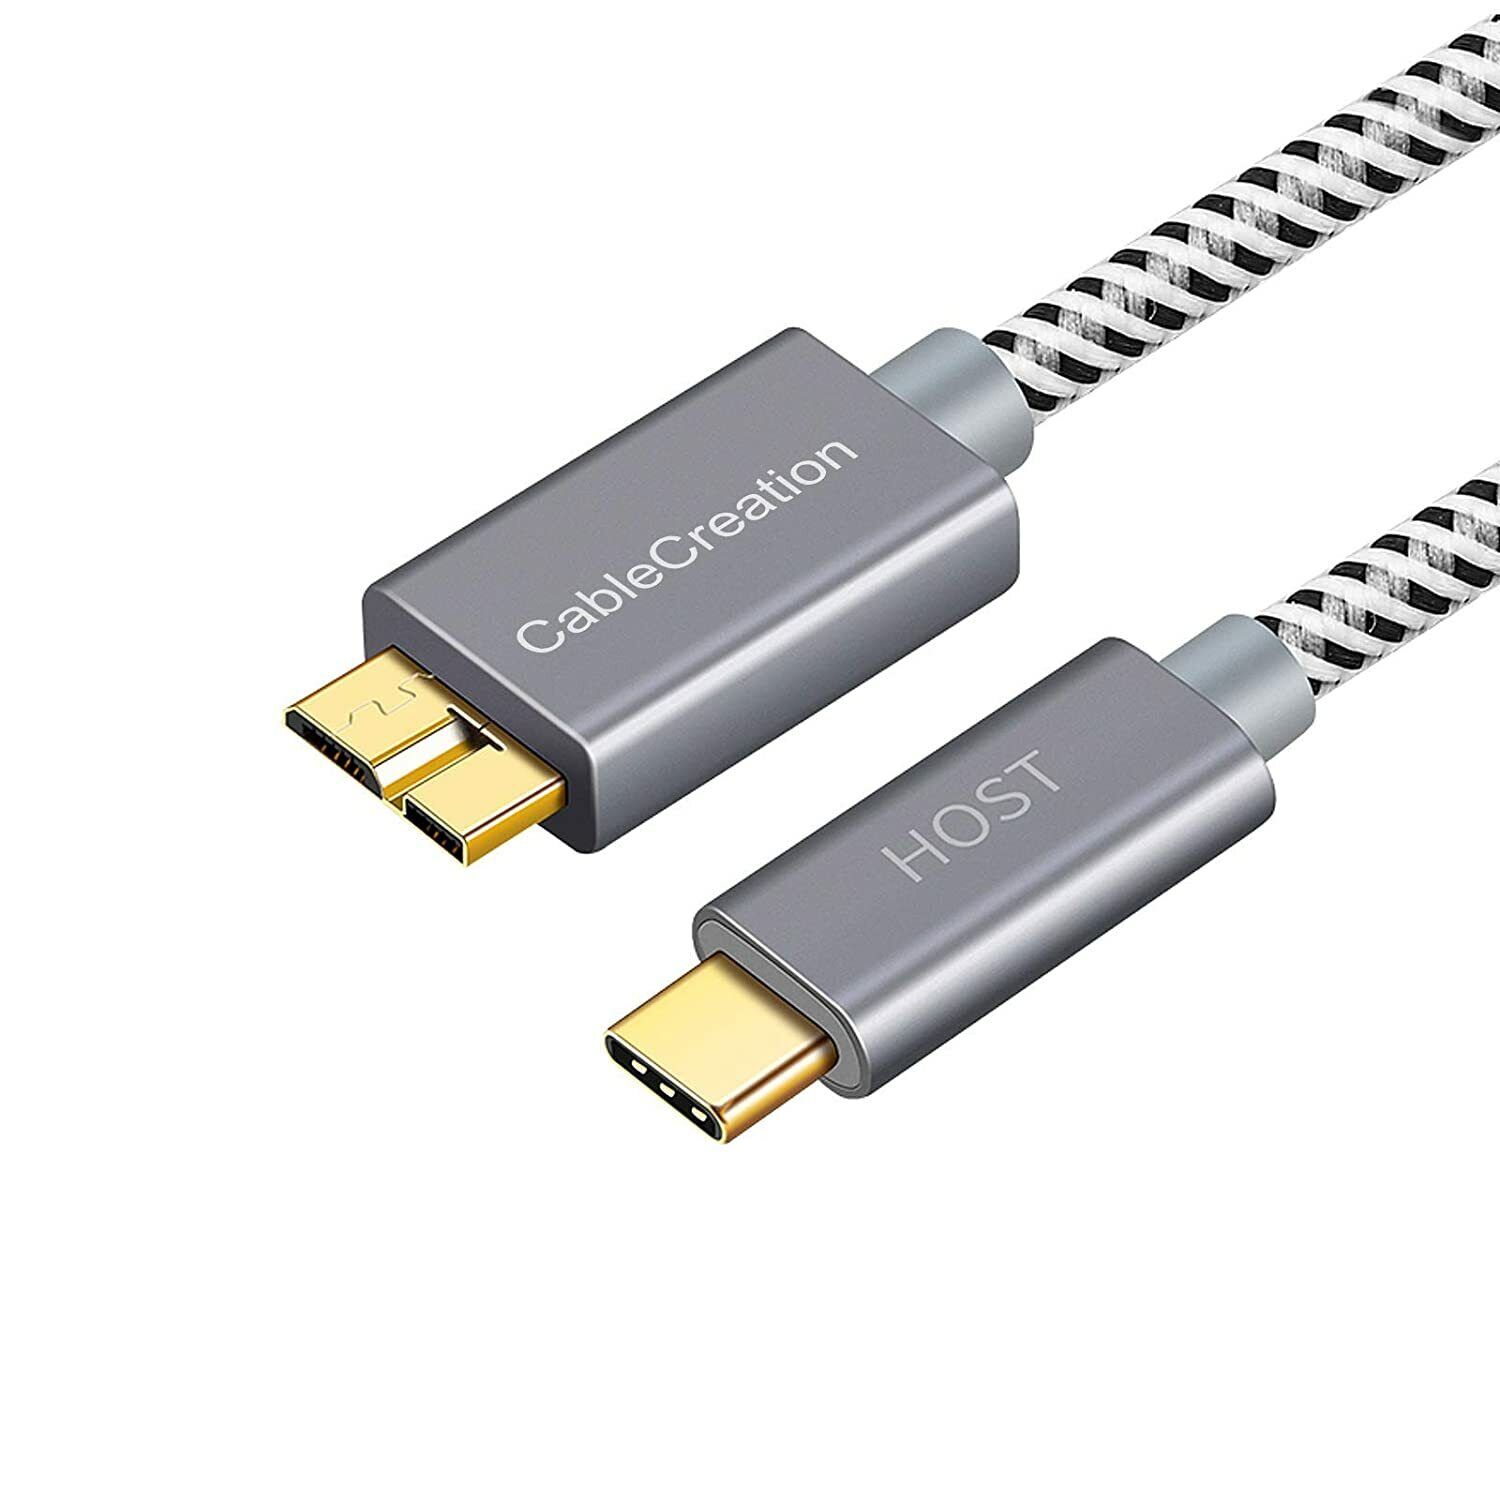 New Cablecreation Short Usb C Hard Drive Cable 1Ft, Usb 3.1 C To Micro B C